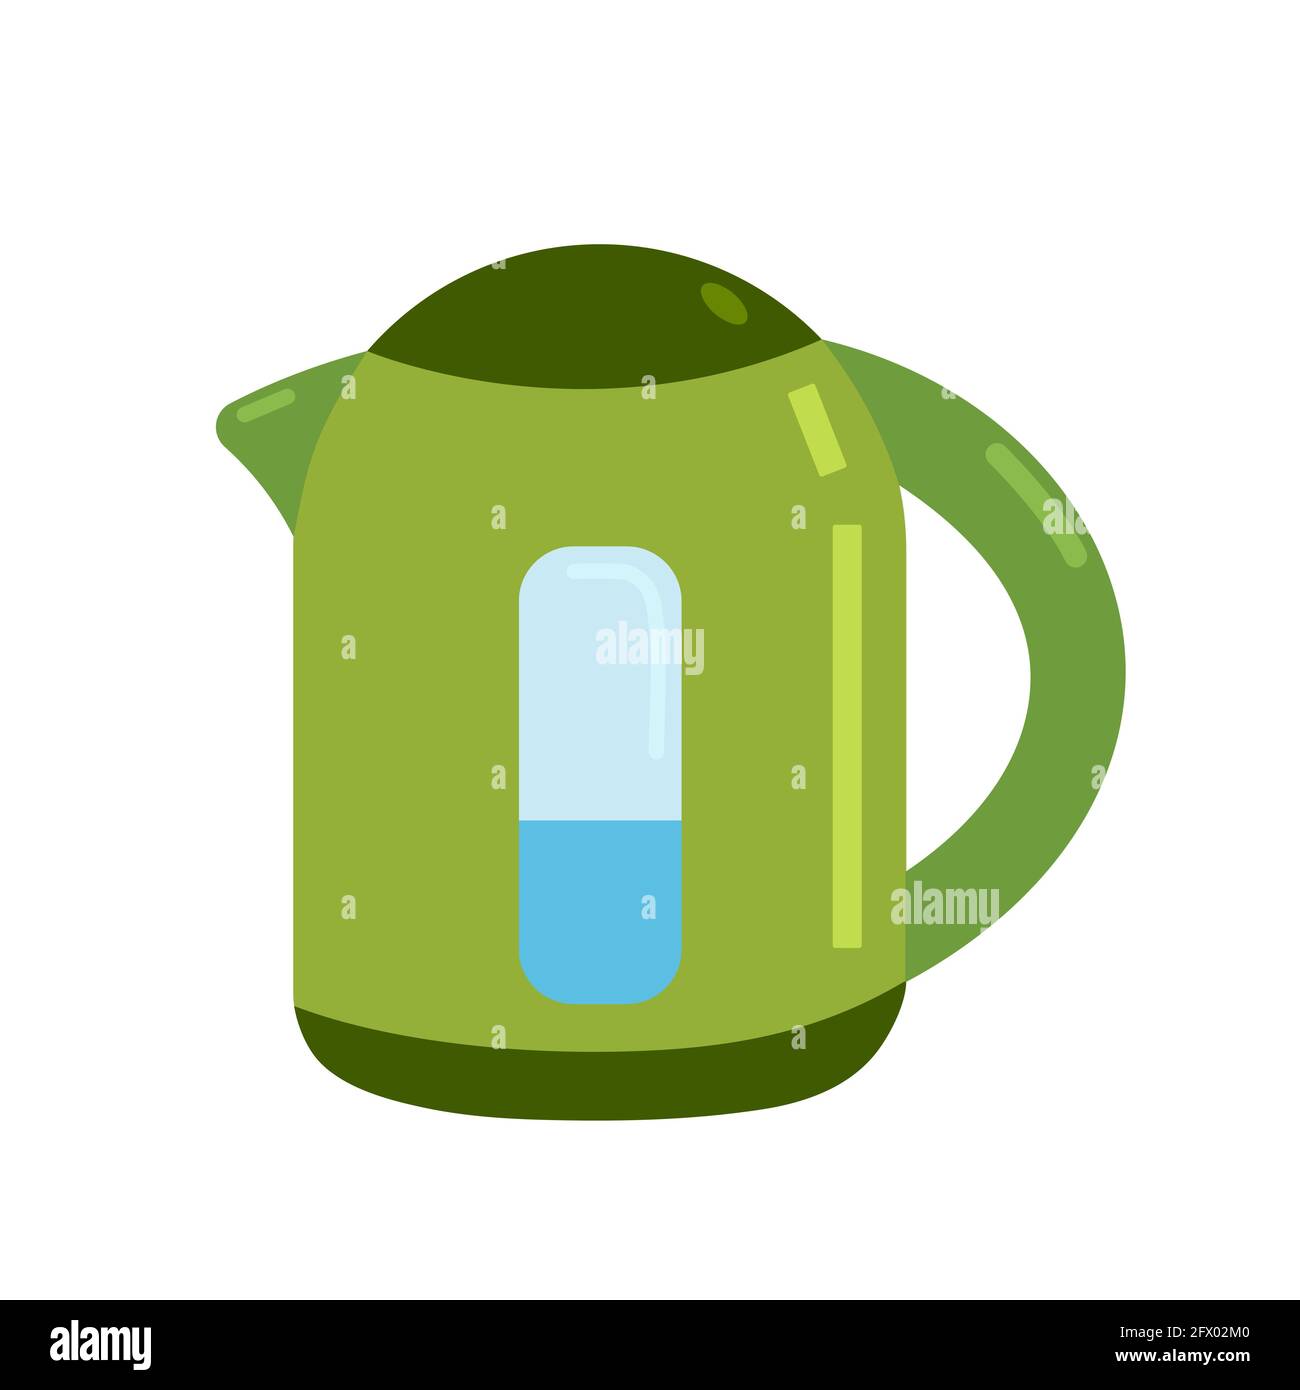 https://c8.alamy.com/comp/2FX02M0/kitchen-green-electric-kettle-device-for-boiling-water-vector-clipart-in-flat-style-isolate-2FX02M0.jpg